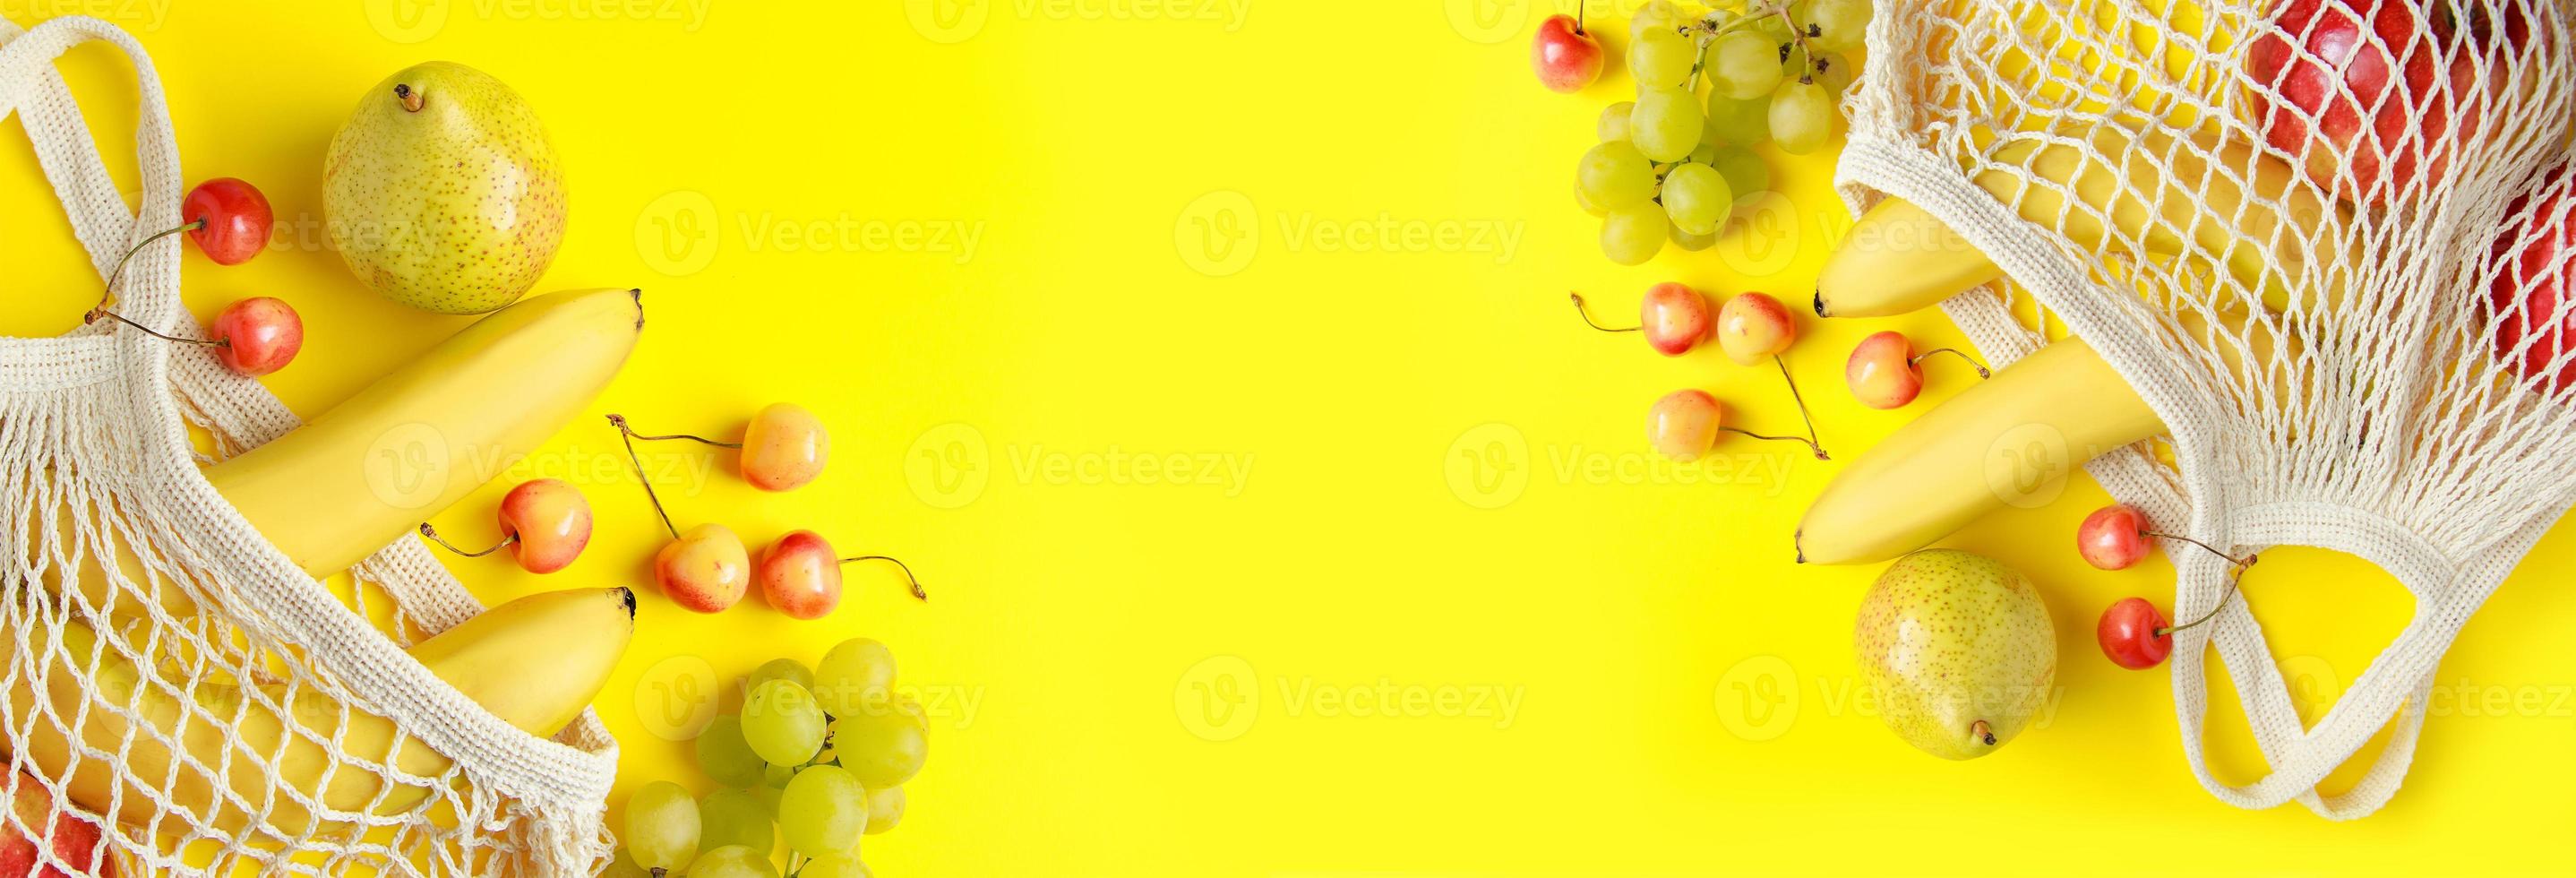 Ripe fruits in mesh bag on yellow background. photo